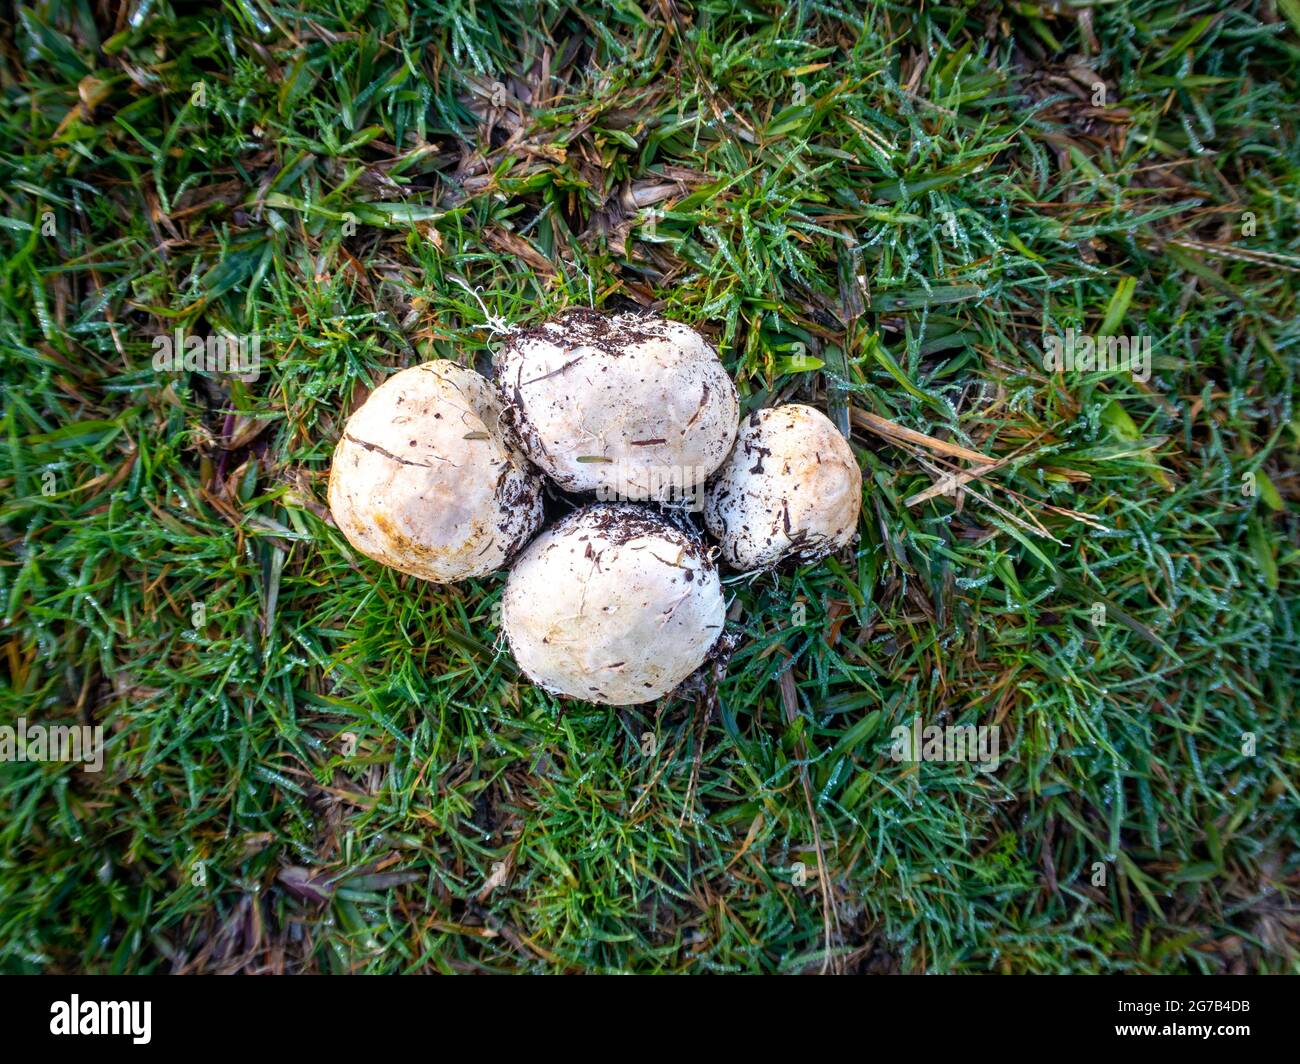 Ileodictyon cibarium, Basket Fungus, that look like puff balls, picked out from the garden and laid on the grass to examine them, New Zealand Stock Photo